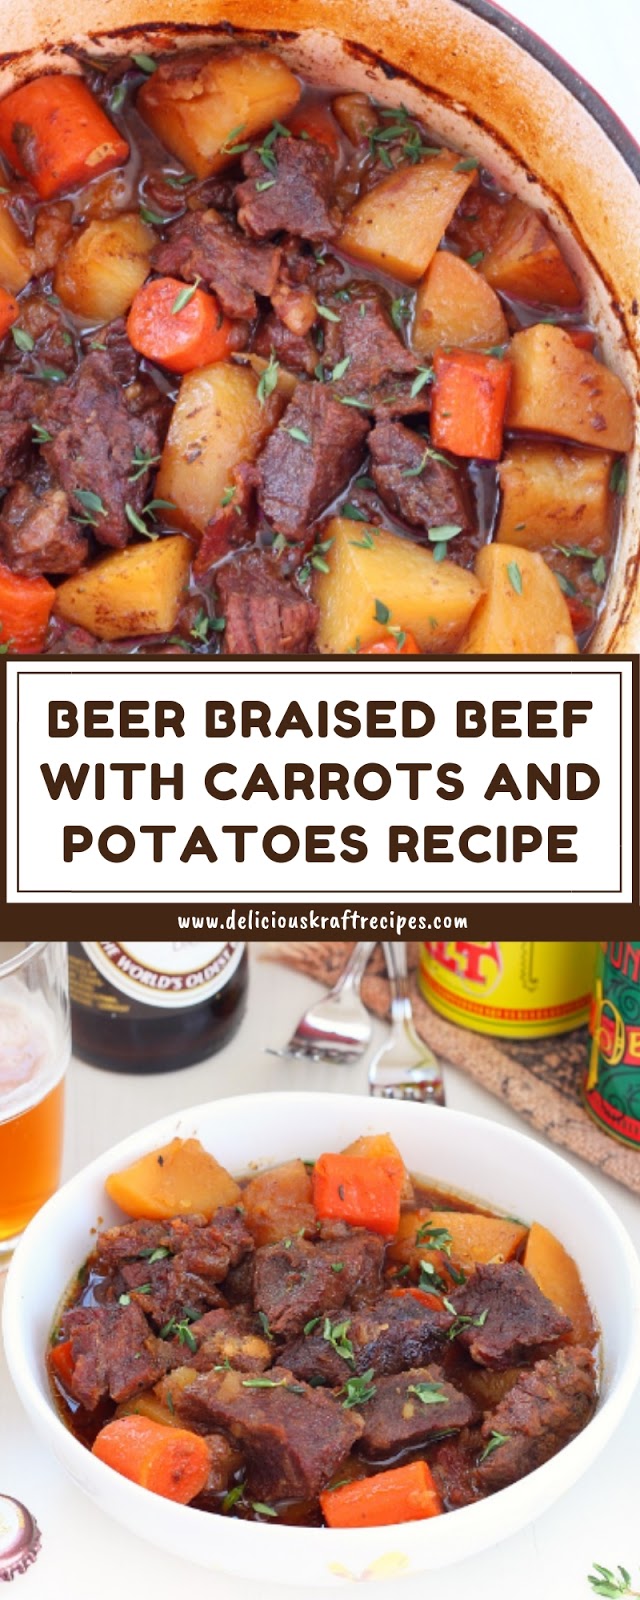 BEER BRAISED BEEF WITH CARROTS AND POTATOES RECIPE